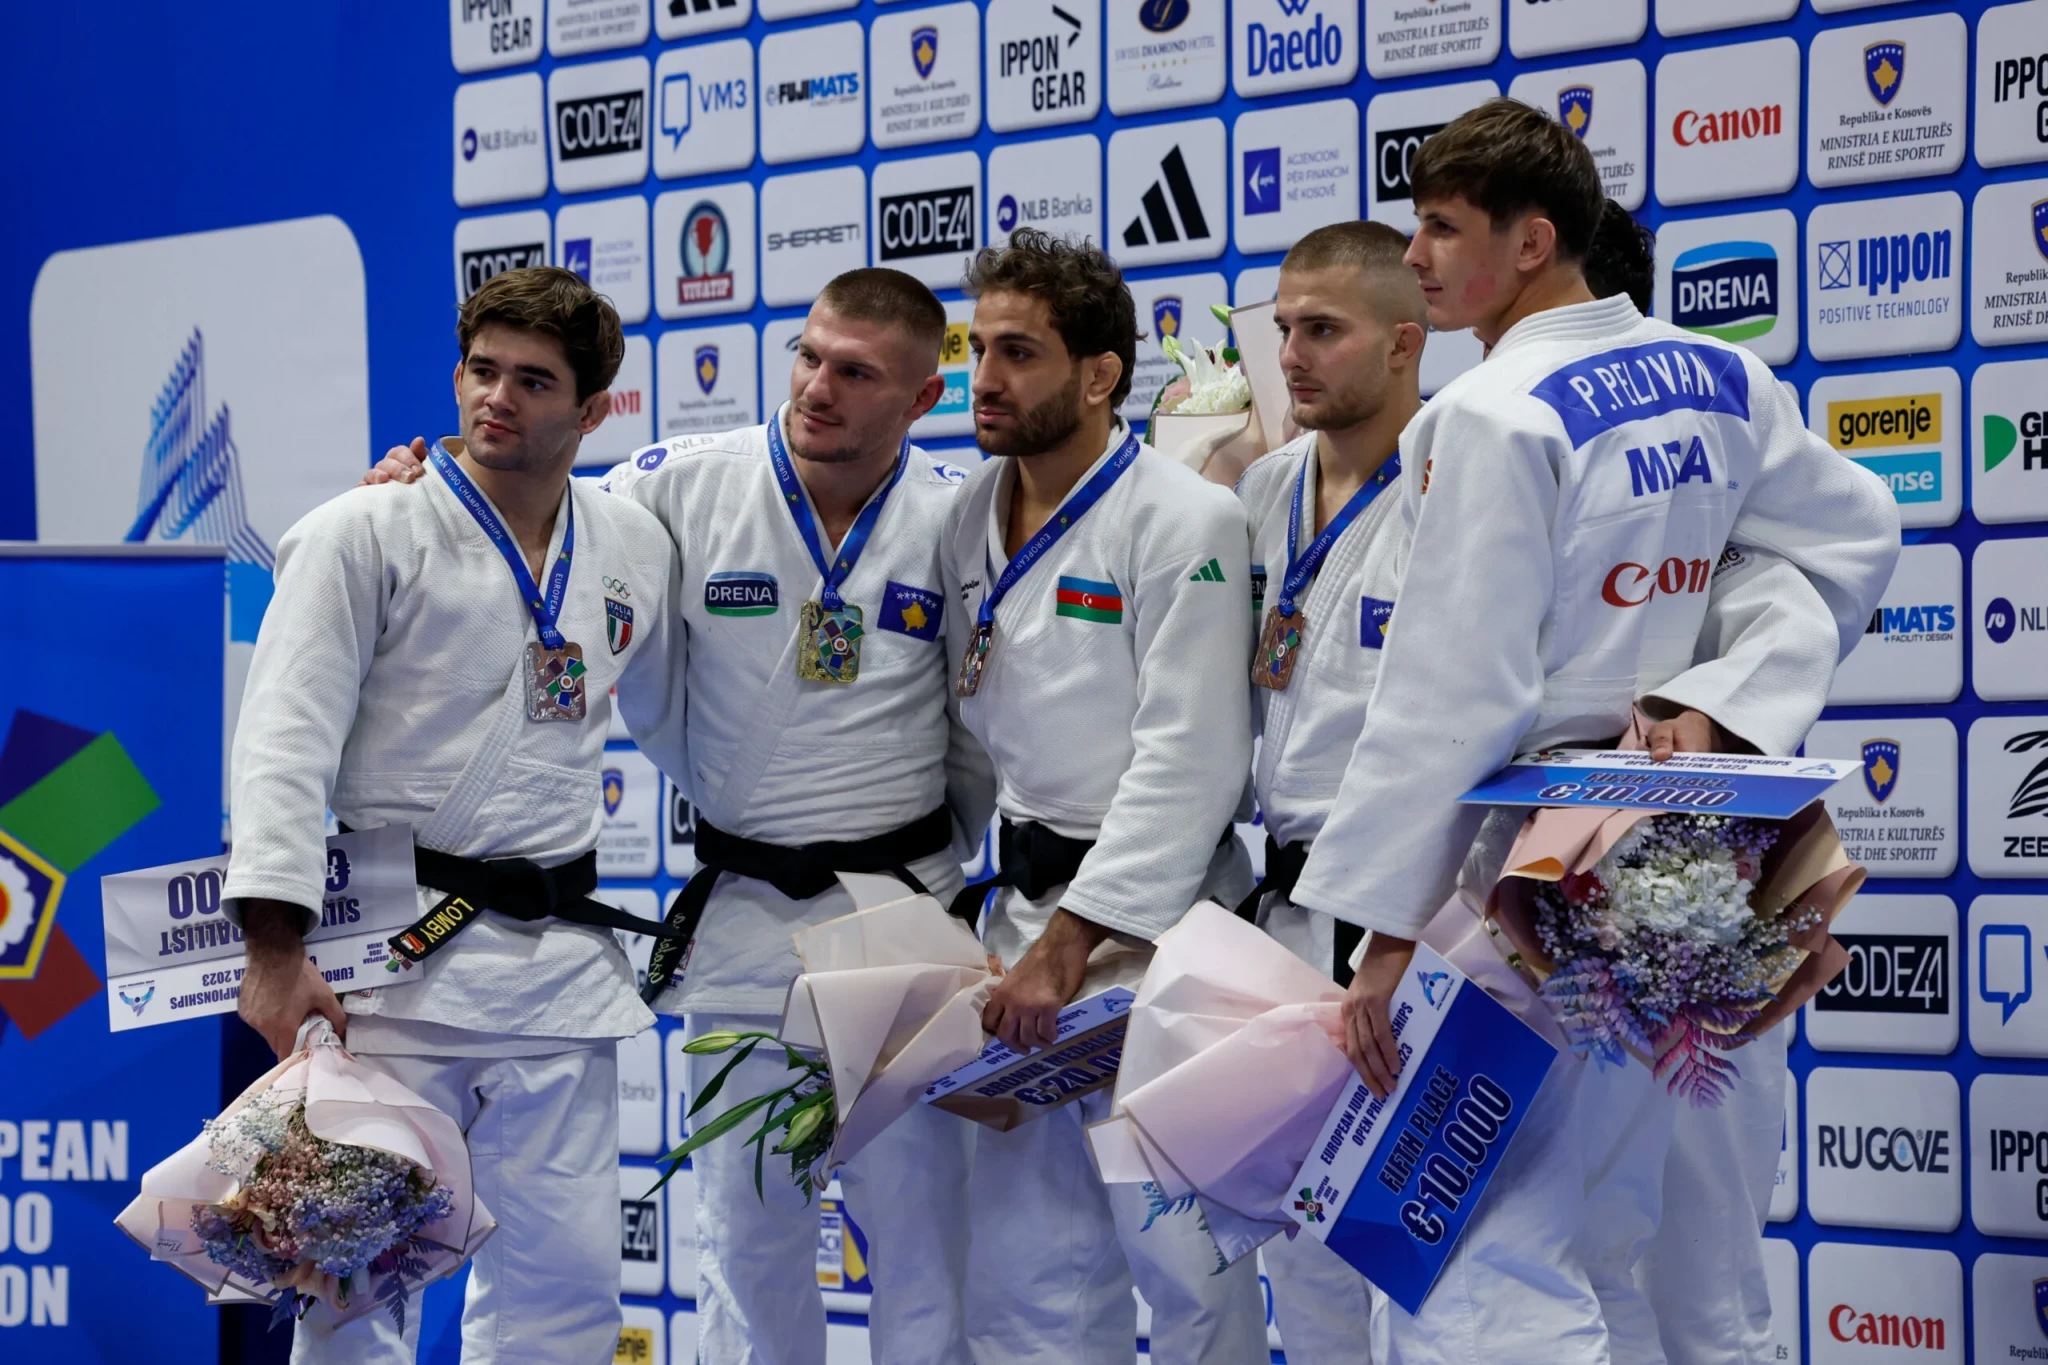 The prize money winners in men's 73 kg weight category at European Championships Open in Pristina © EJU Media